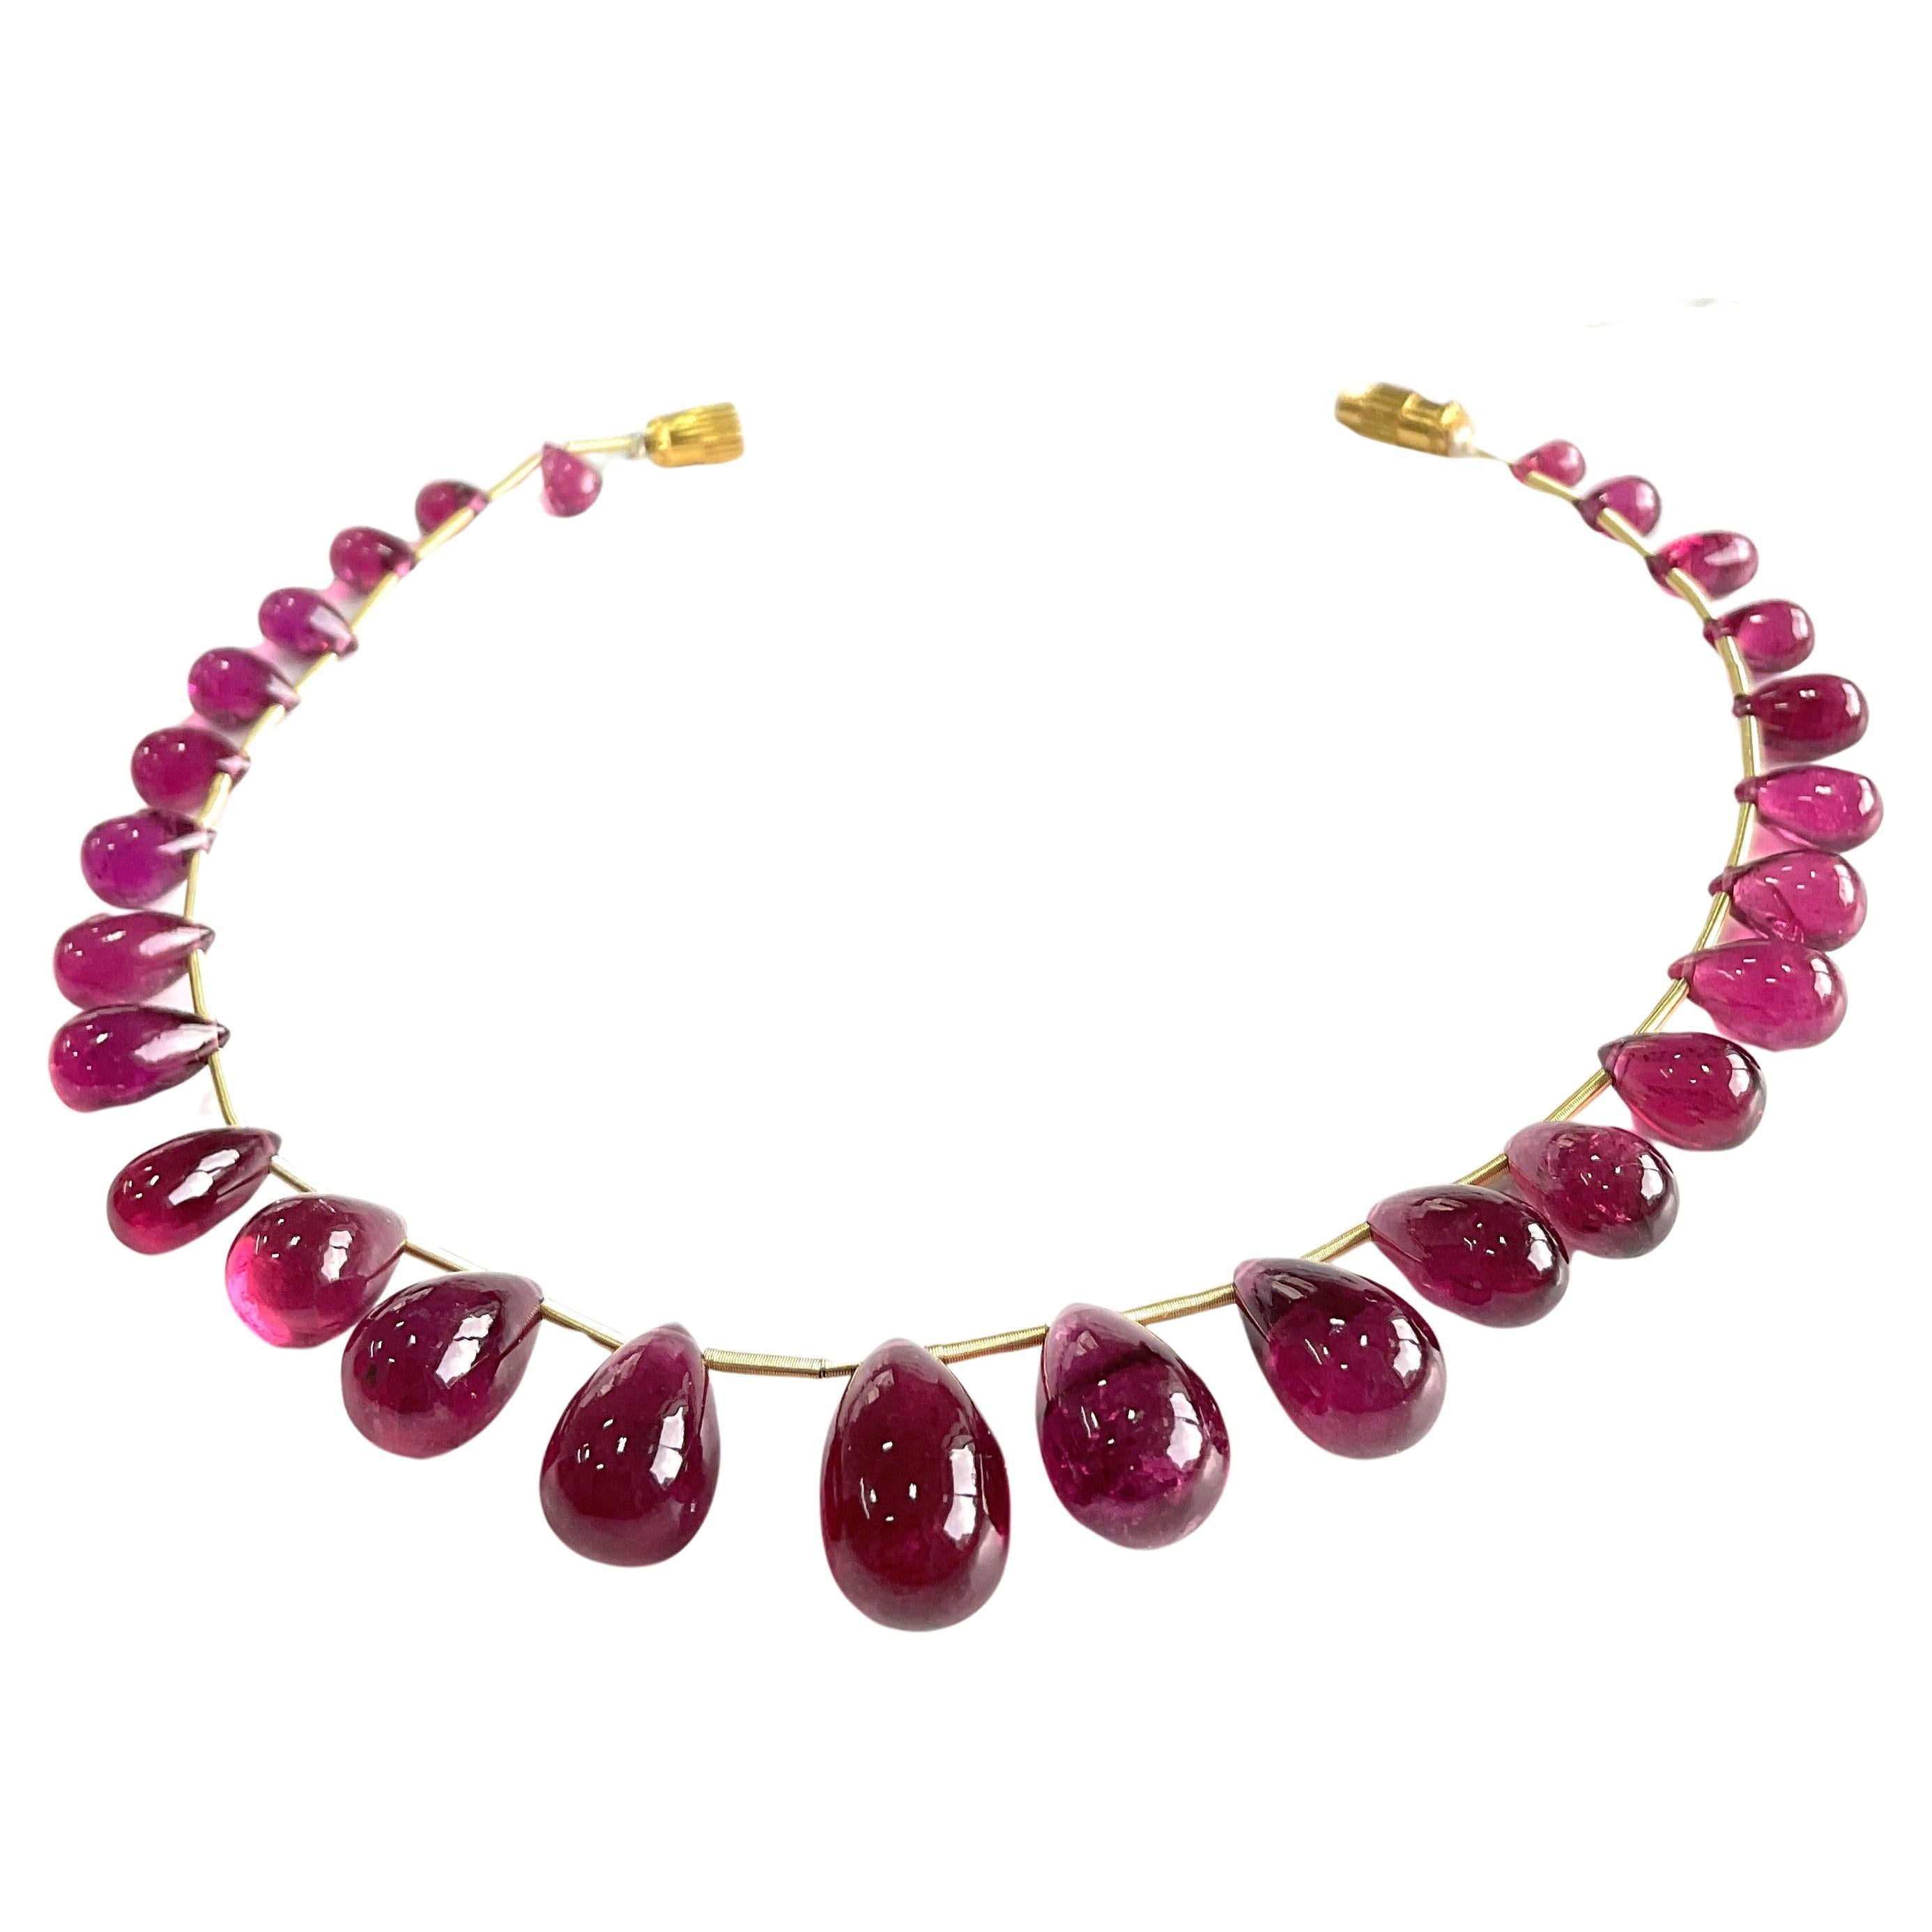 80.00 Carats Rubellite Layout Drops Top Quality For Fine Jewelry Natural Gem For Sale